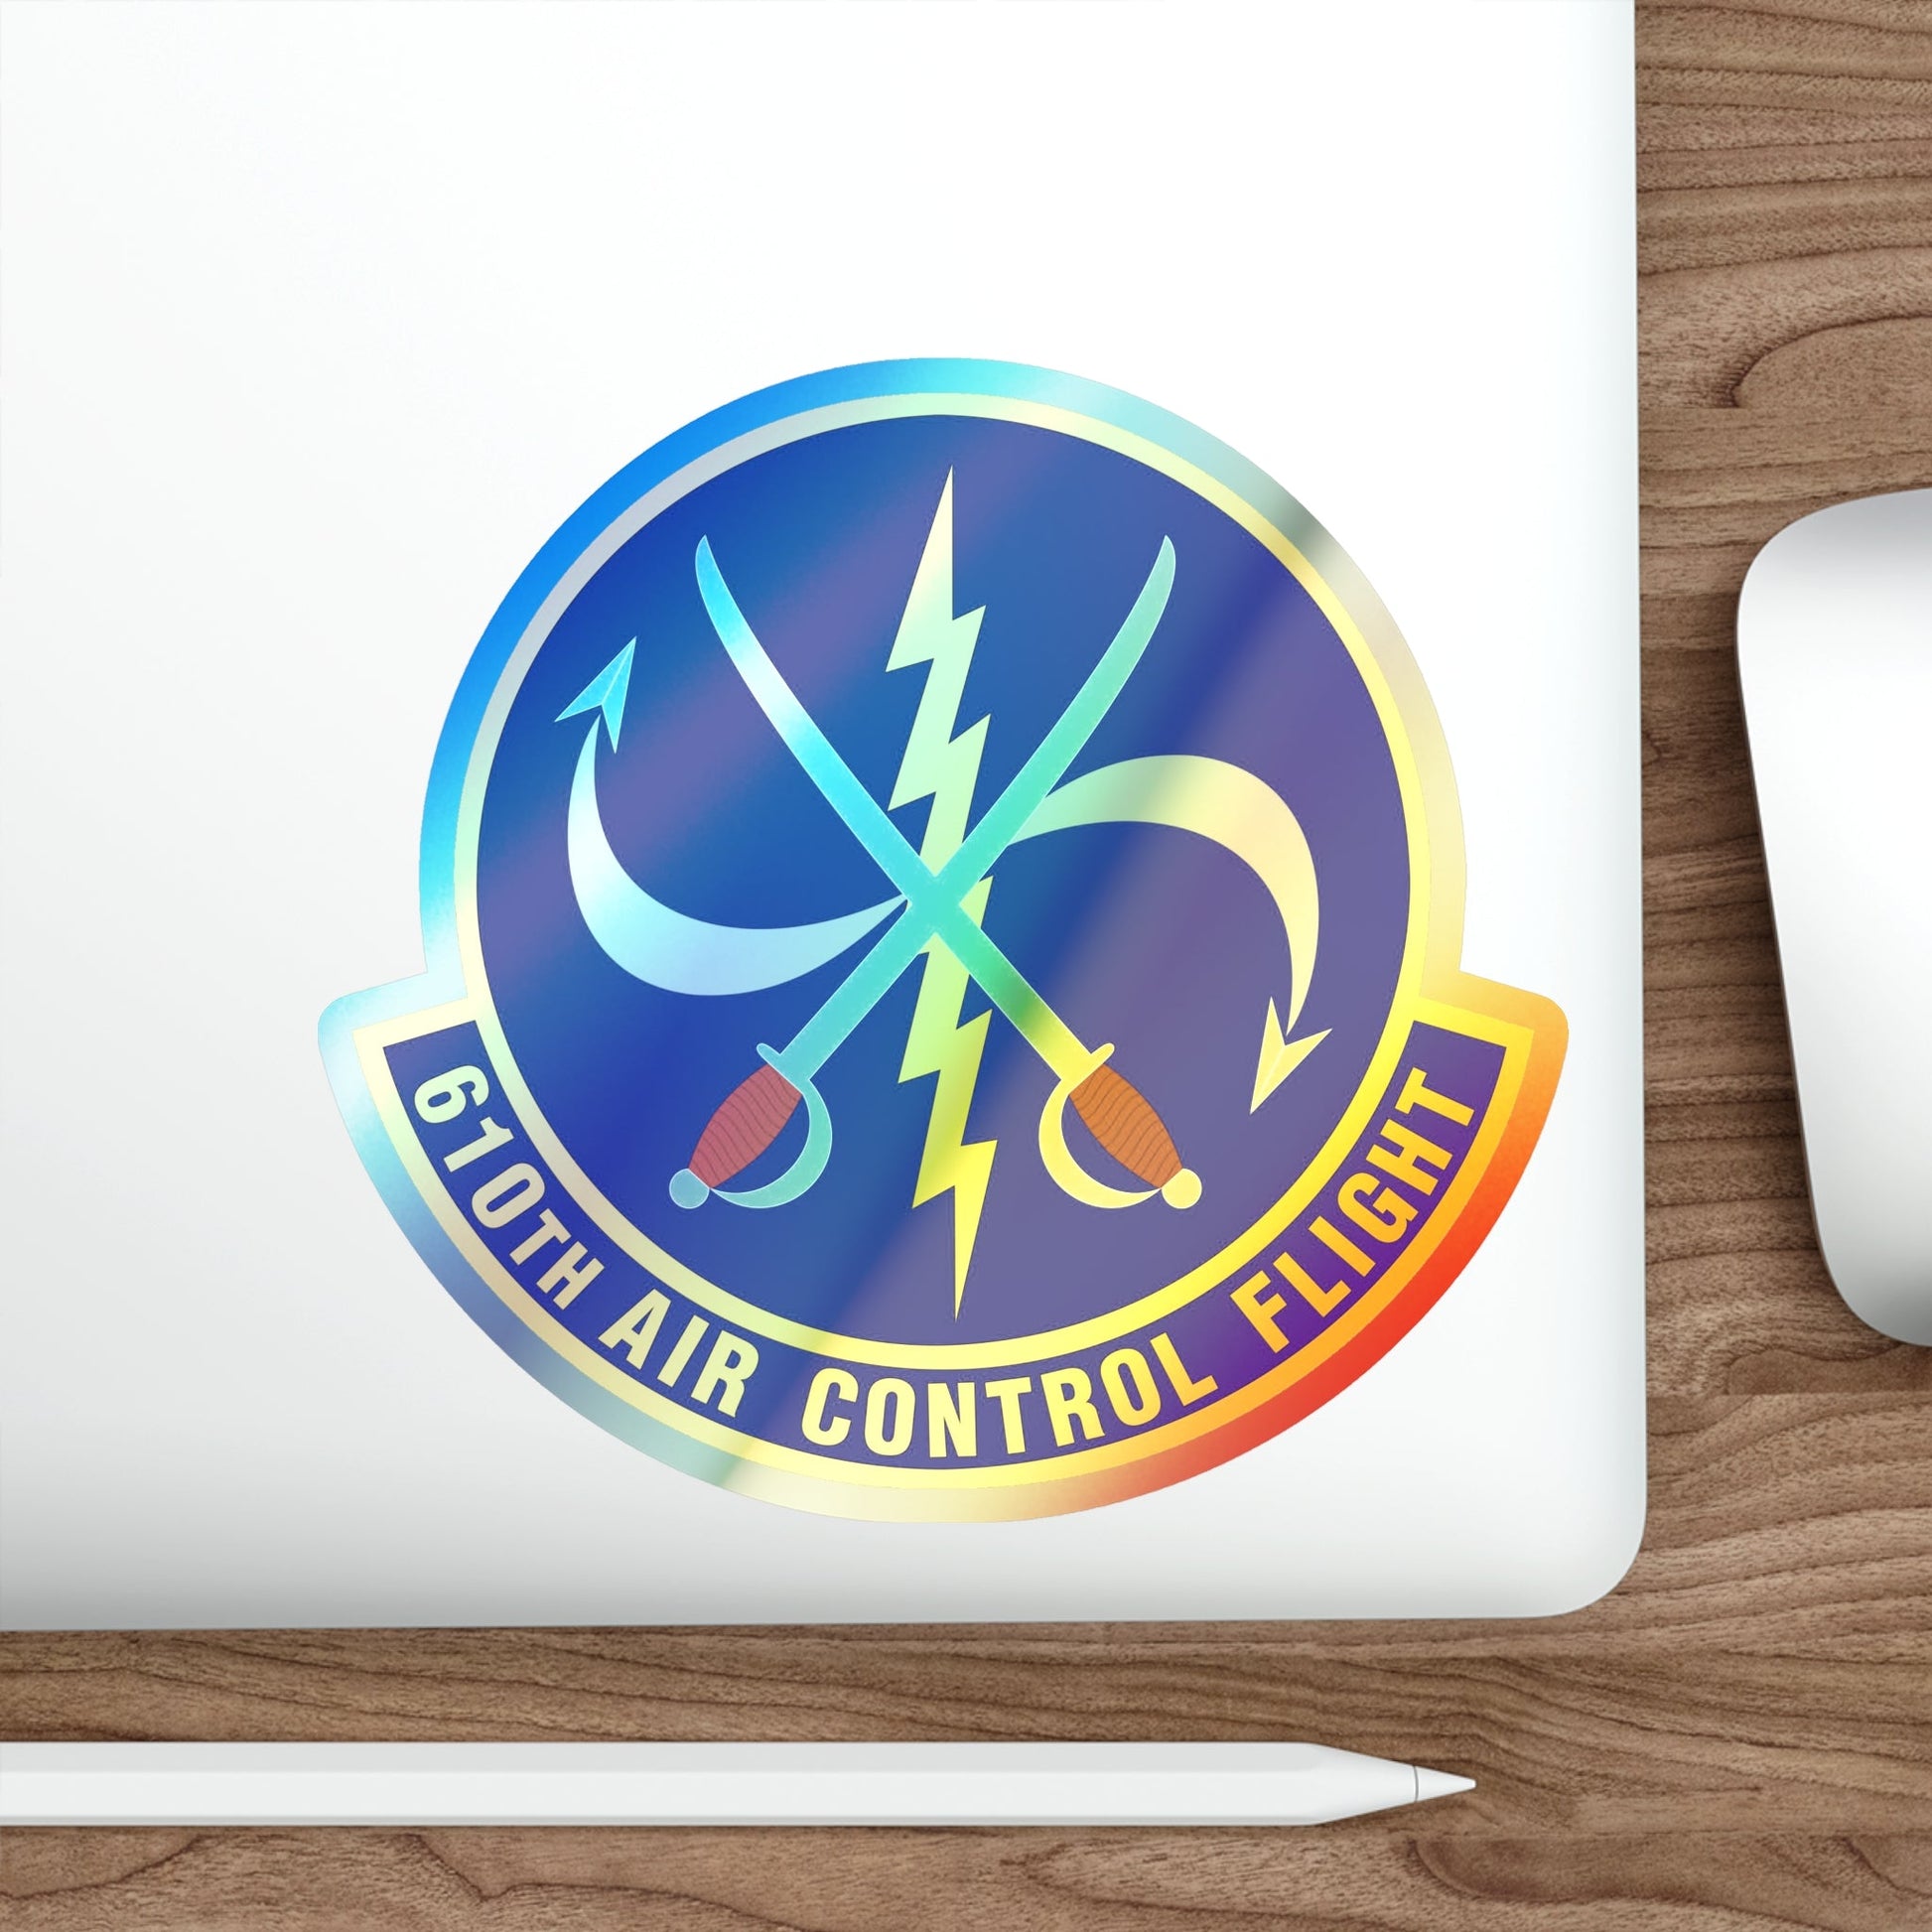 610 Air Control Flight PACAF (U.S. Air Force) Holographic STICKER Die-Cut Vinyl Decal-The Sticker Space